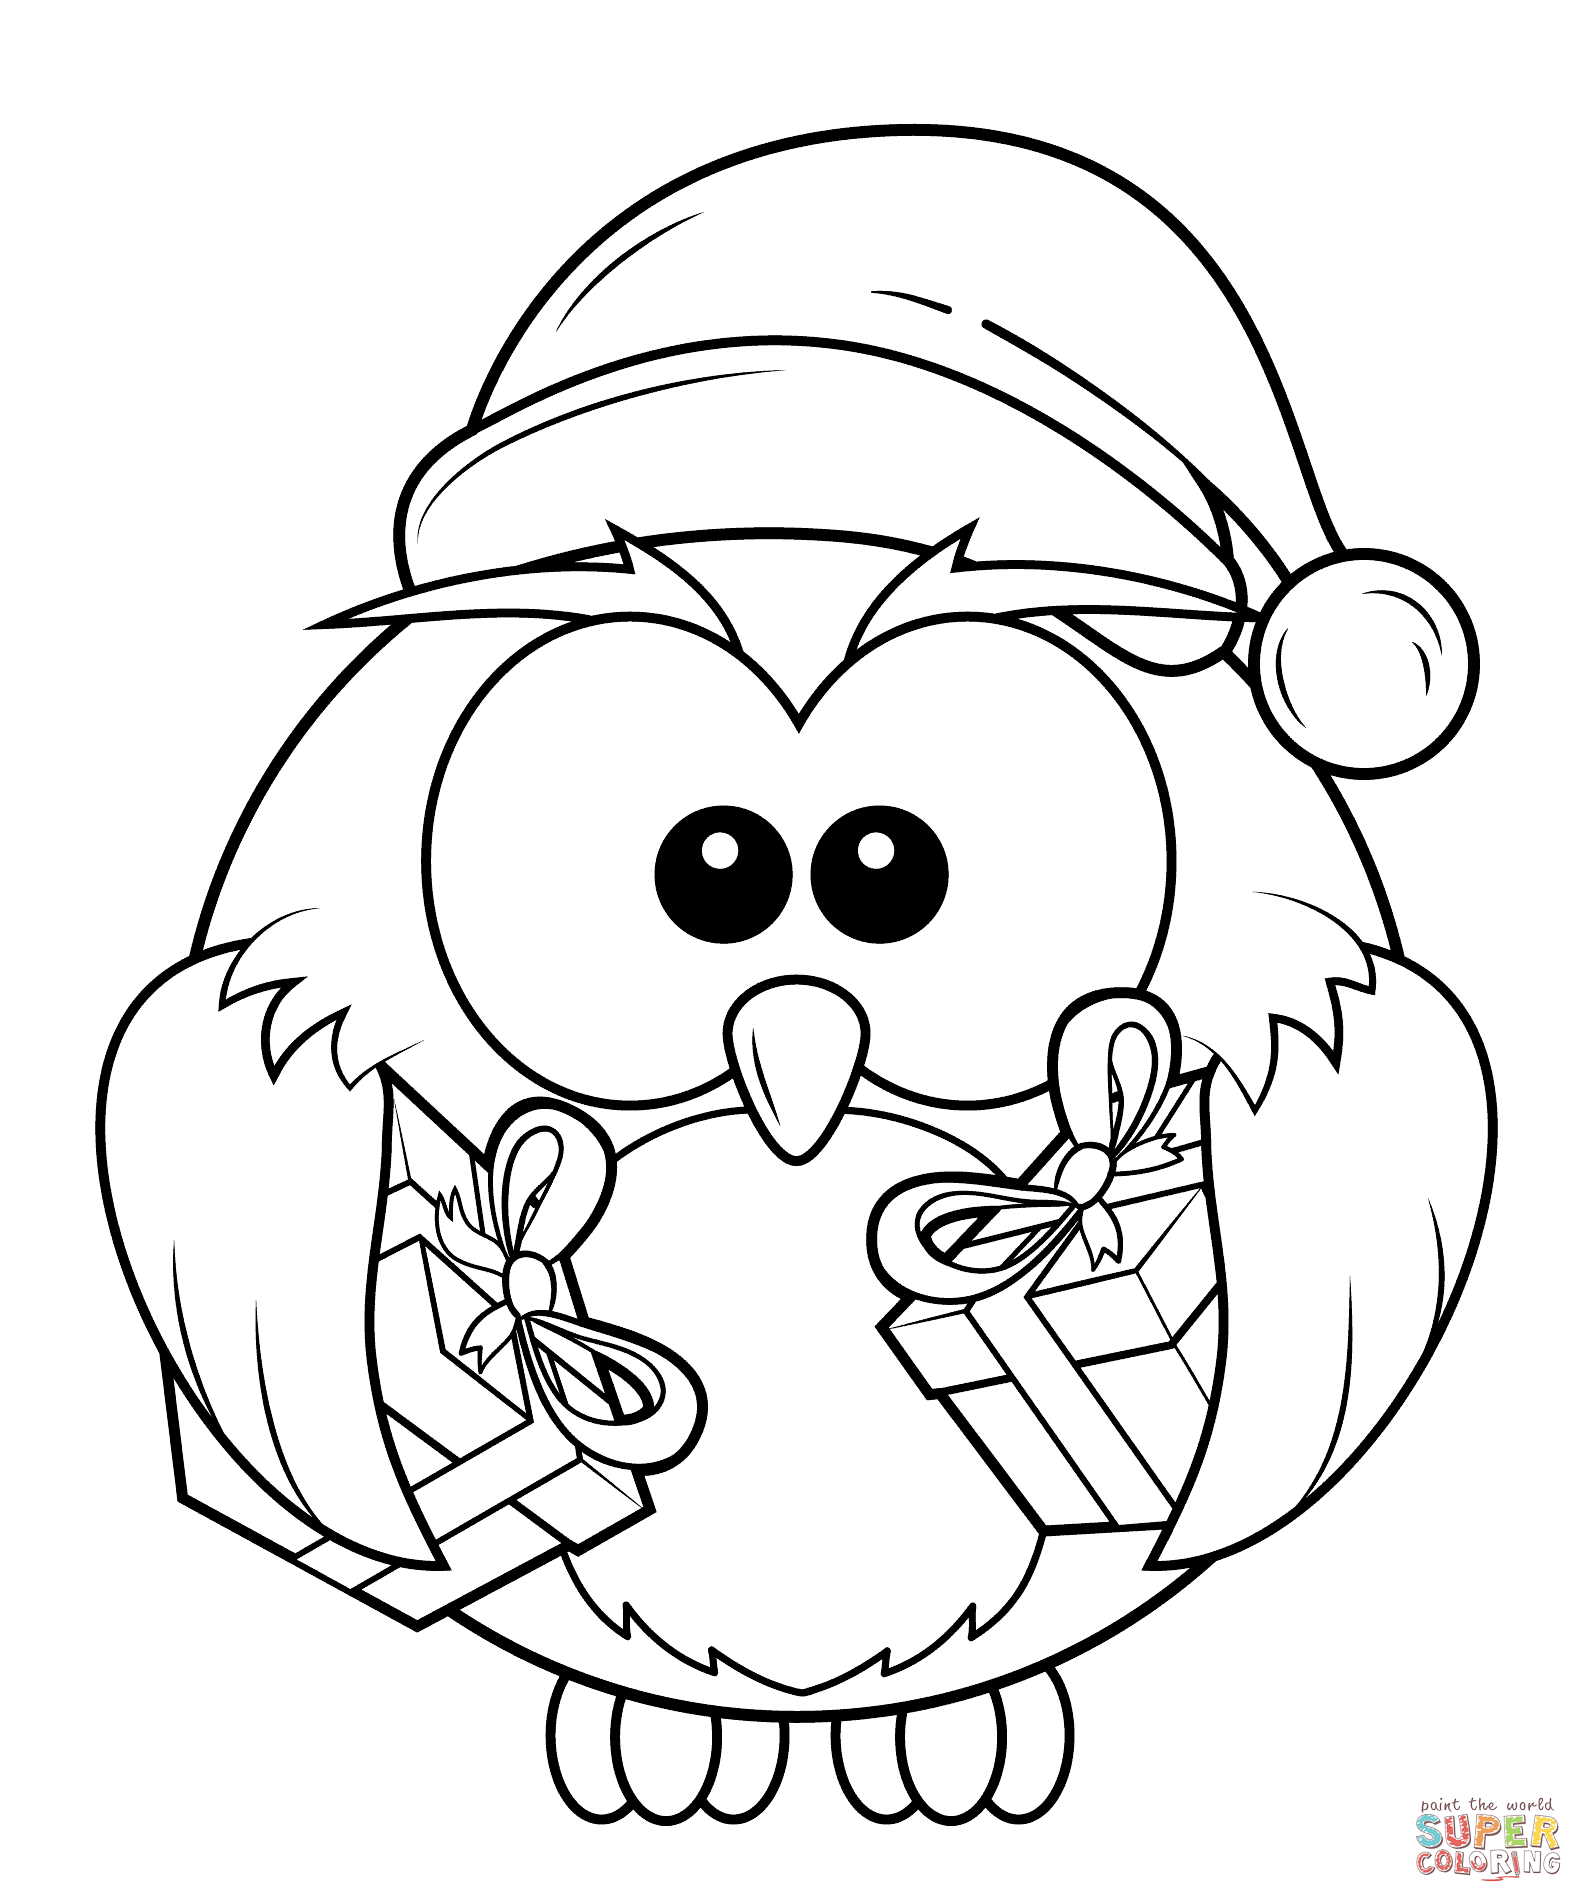 pics of owls to color cartoon owl coloring page free printable coloring pages owls of color to pics 